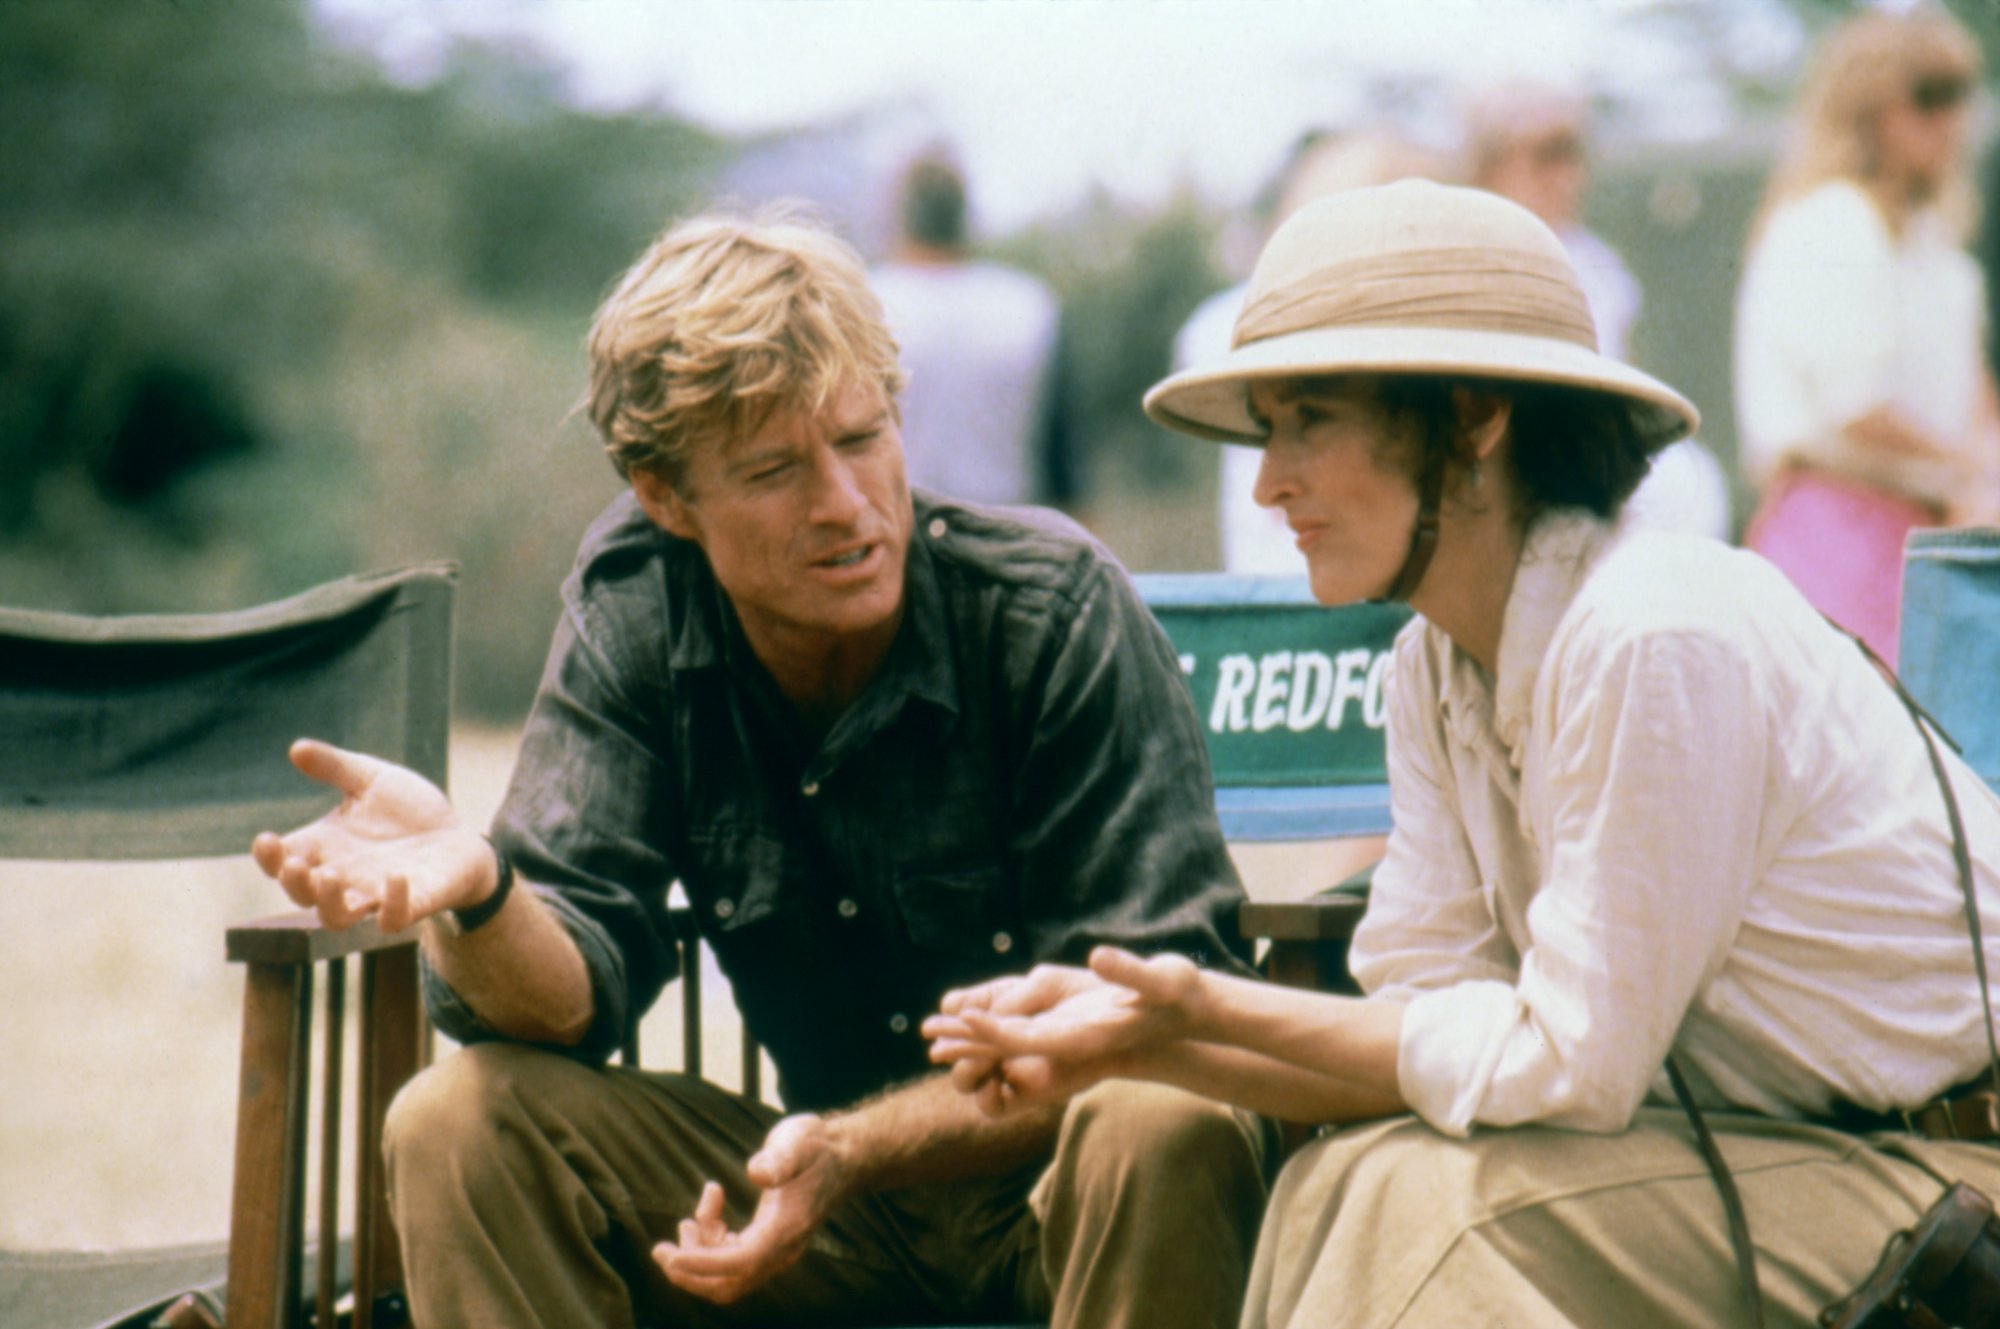 'Out of Africa' Robert Redford and Meryl Streep talking while sitting in their chairs with their names on them